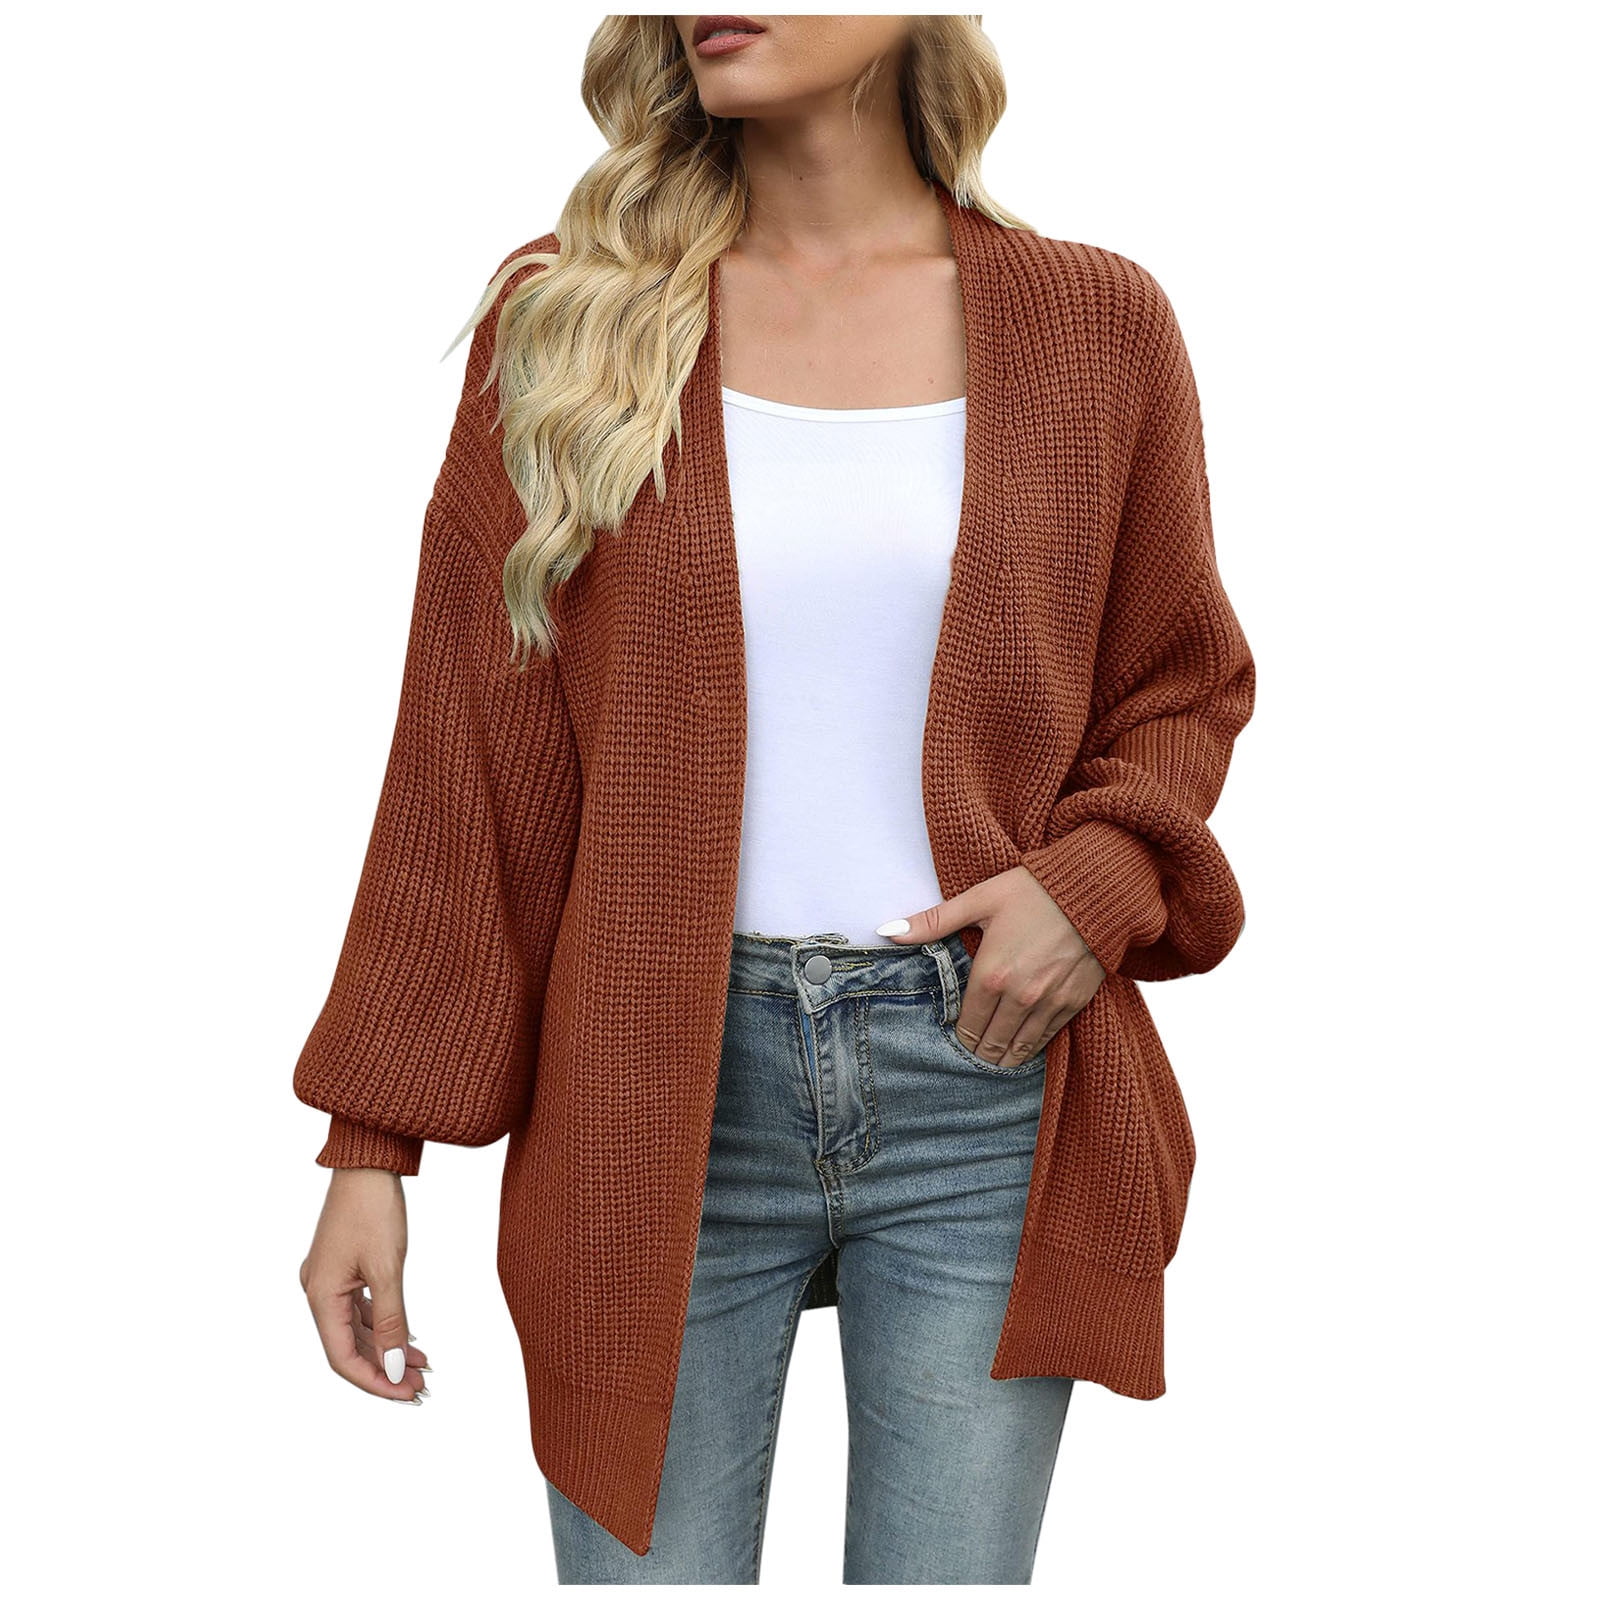 ZQGJB Fall Long Sleeve Open Front Cardigans for Women Loose Fit Casual  Solid Color Asymmetric Pullover Sweater Tops Trendy Cable Knitted Outwear